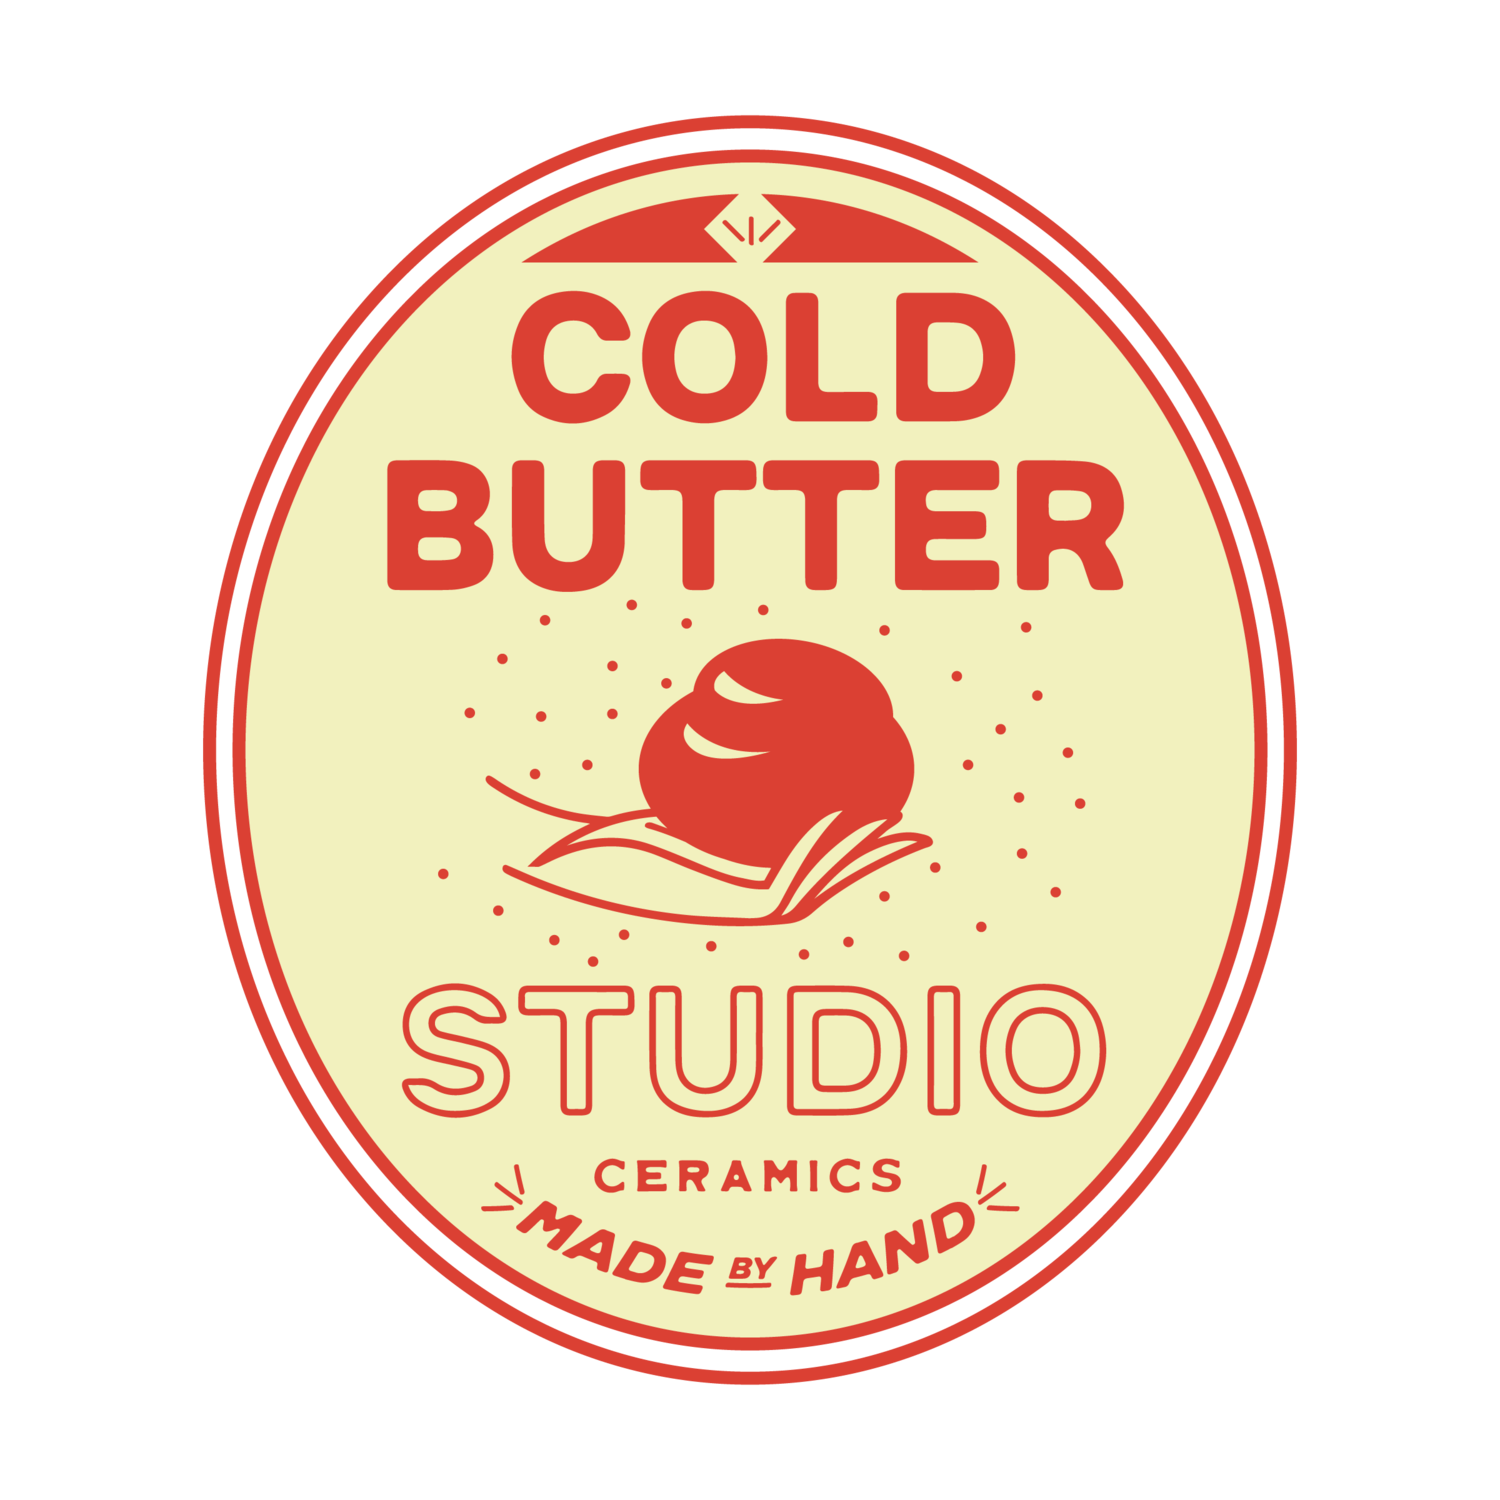 Cold Butter Studio